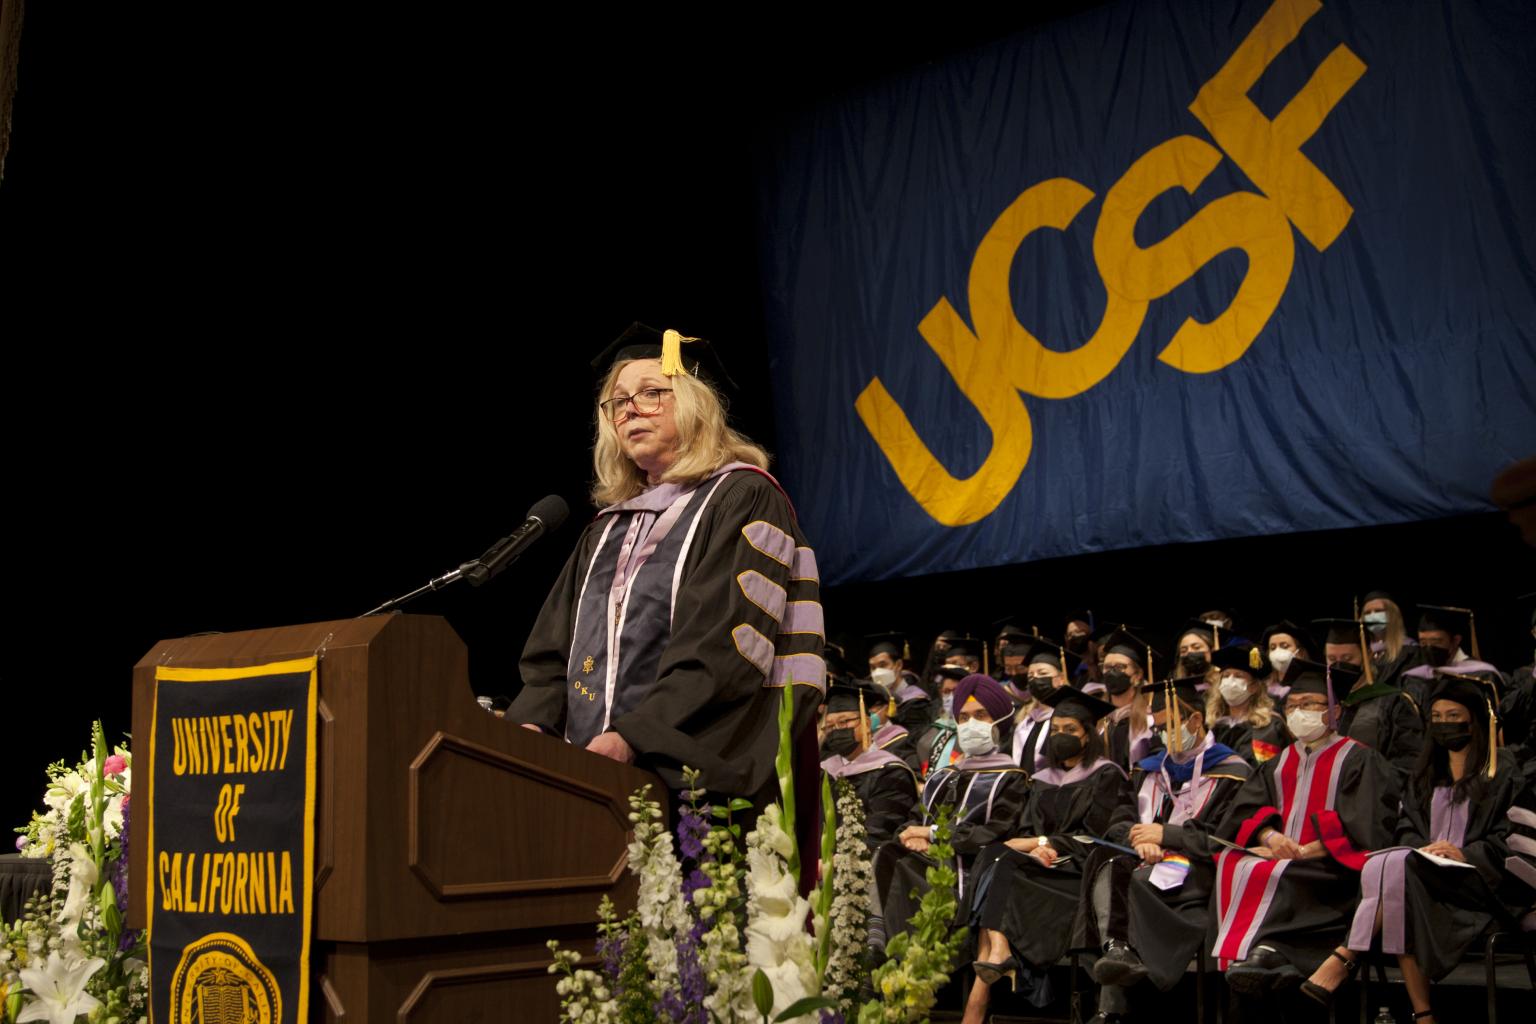 Karen West, president and CEO of ADEA, gave the keynote at the UCSF Dentistry commencement on June 6, 2022.